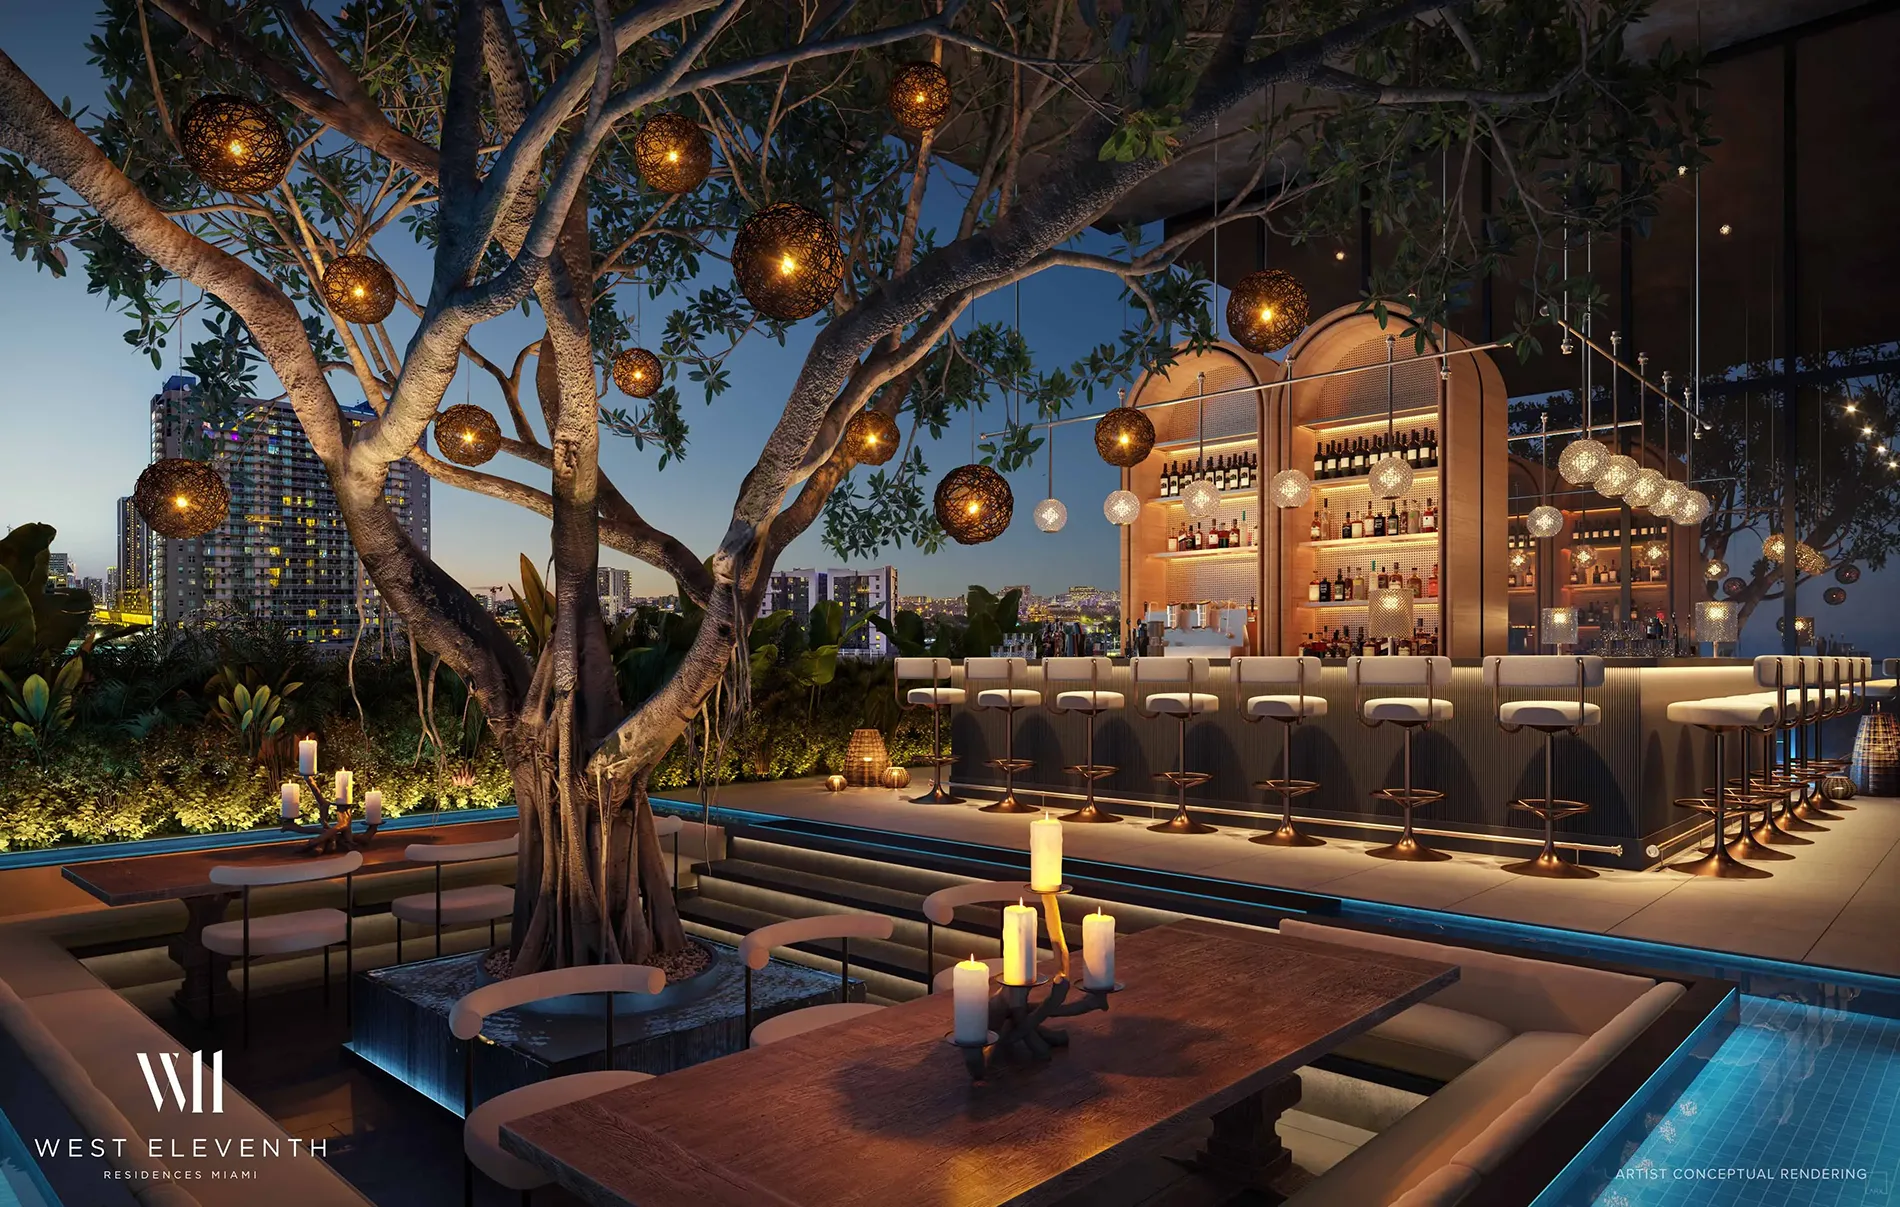 Relax while having drinks at WEST ELEVENTH | RESIDENCES MIAMI